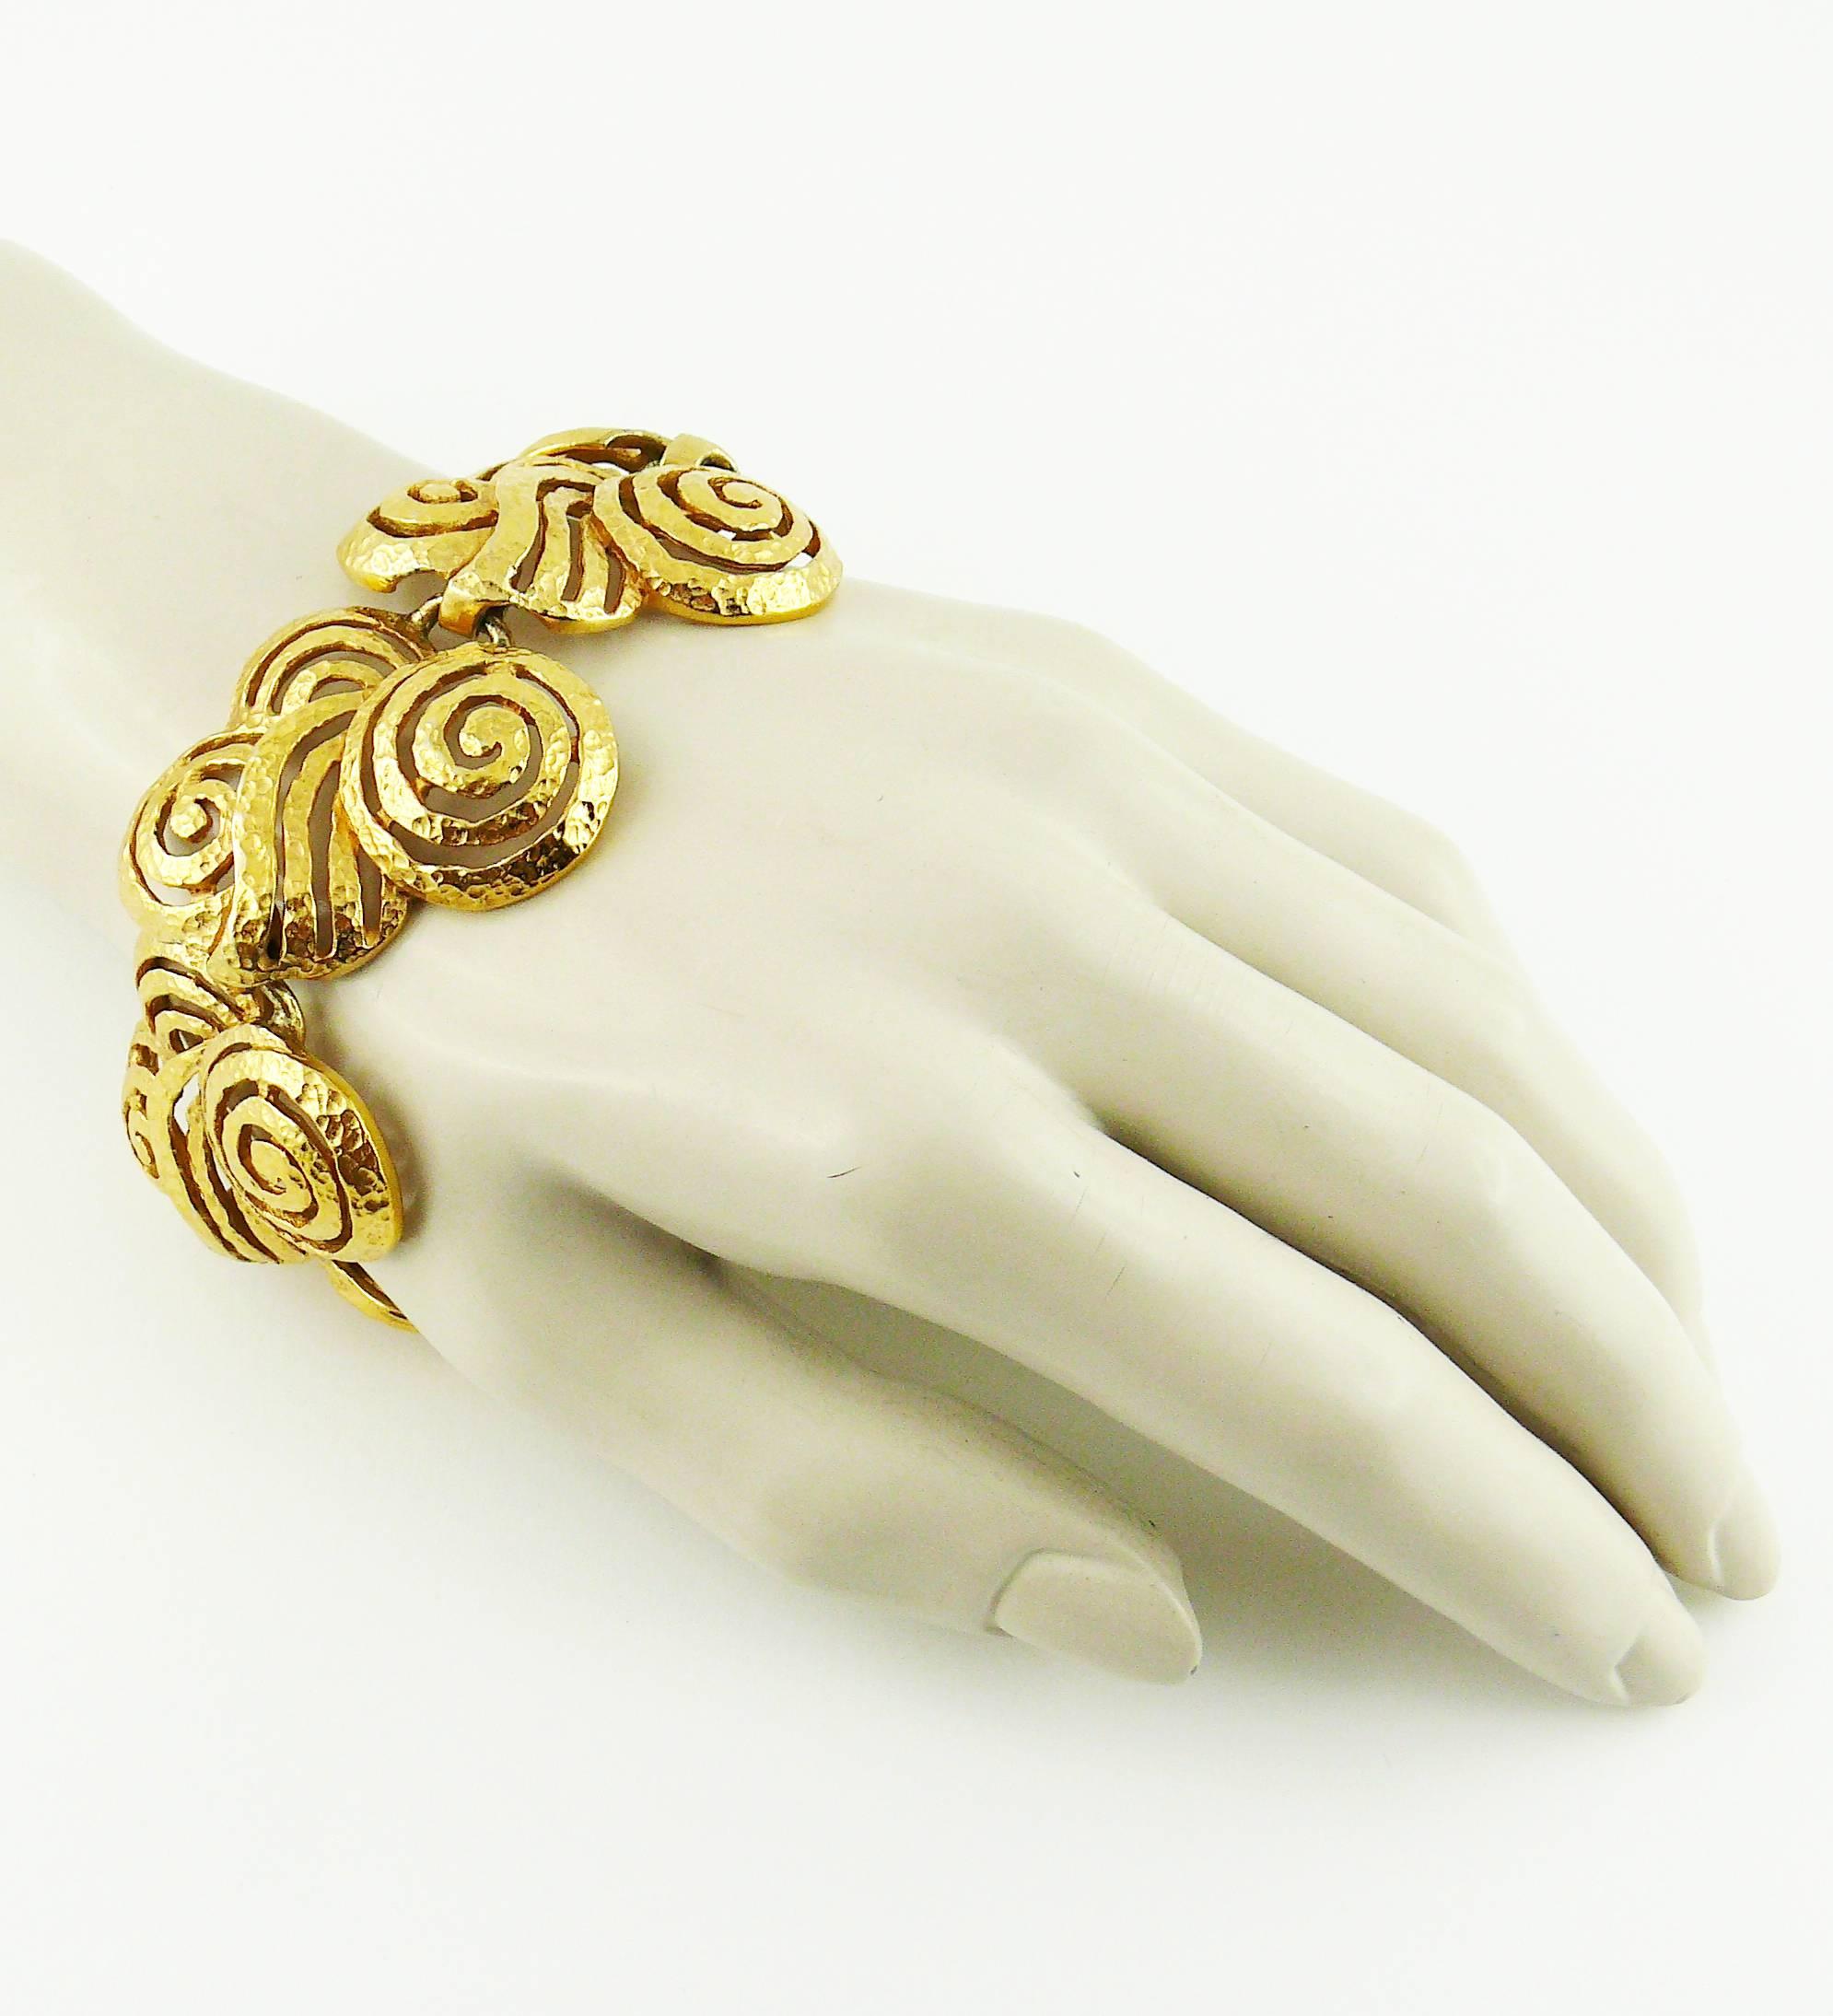 LANVIN vintage gold tone Art Deco style articulated bracelet featuring beautiful textured openwork links.

T bar closure.

Embossed LANVIN Germany.

JEWELRY CONDITION CHART
- New or never worn : item is in pristine condition with no noticeable